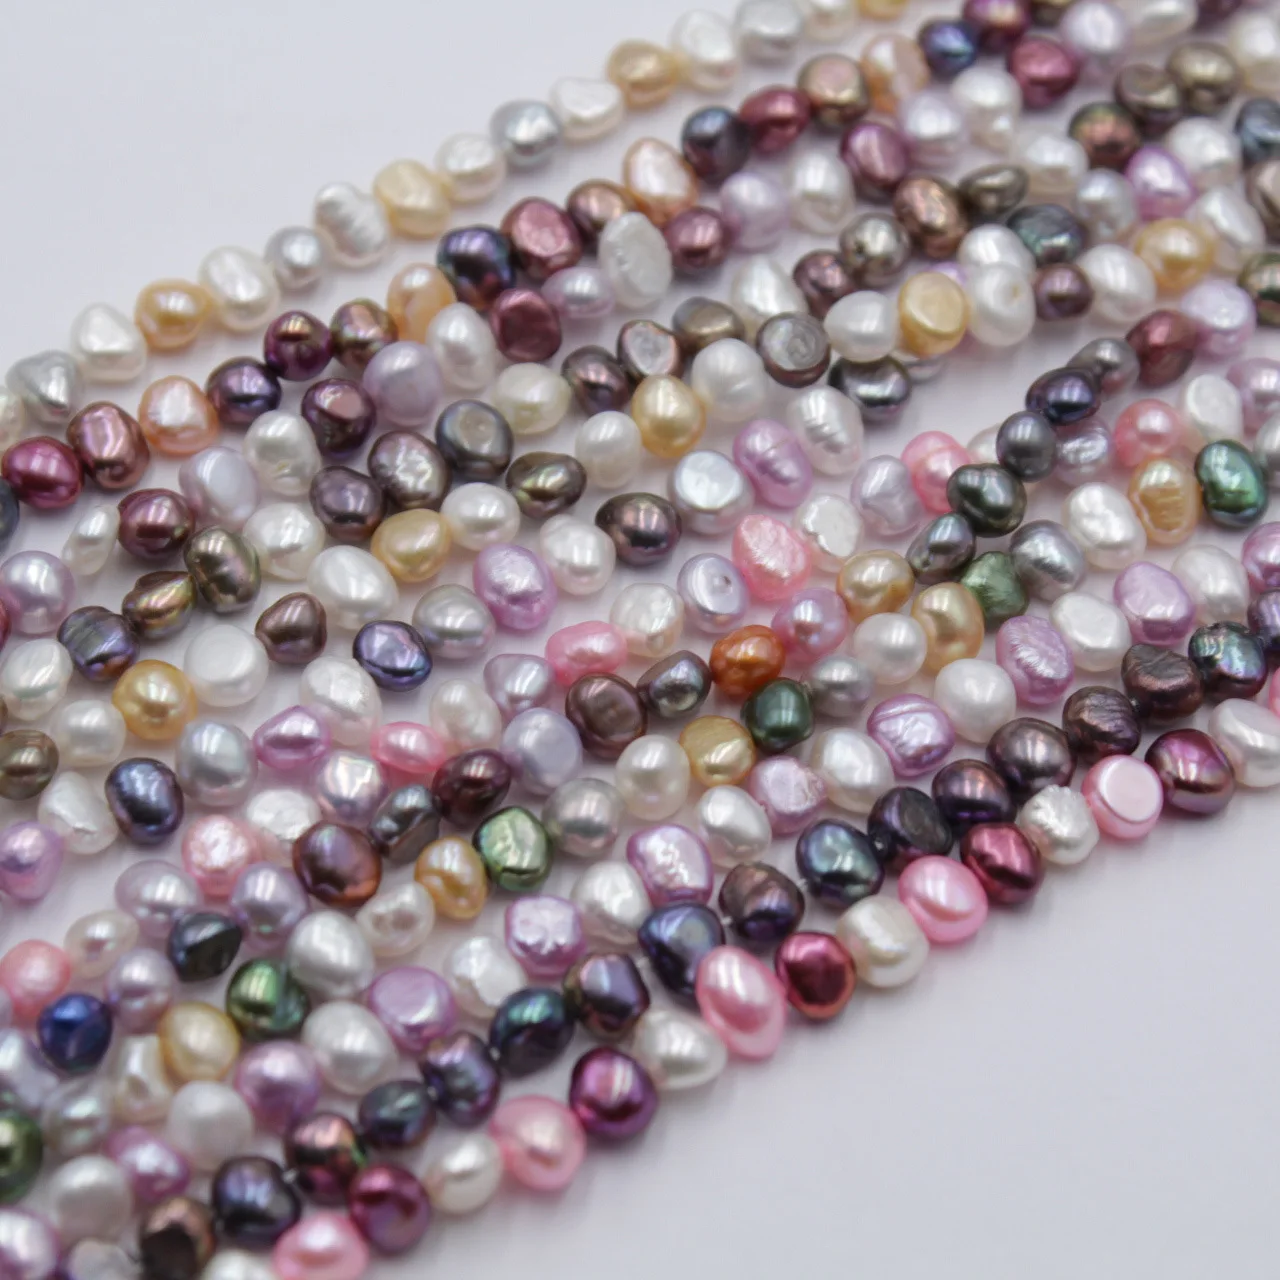 

5-6mm dyed colored Natural Cultured Freshwater Pearl Beads Baroque pearls for Jewelry Making DIY Bracelet Necklace, White